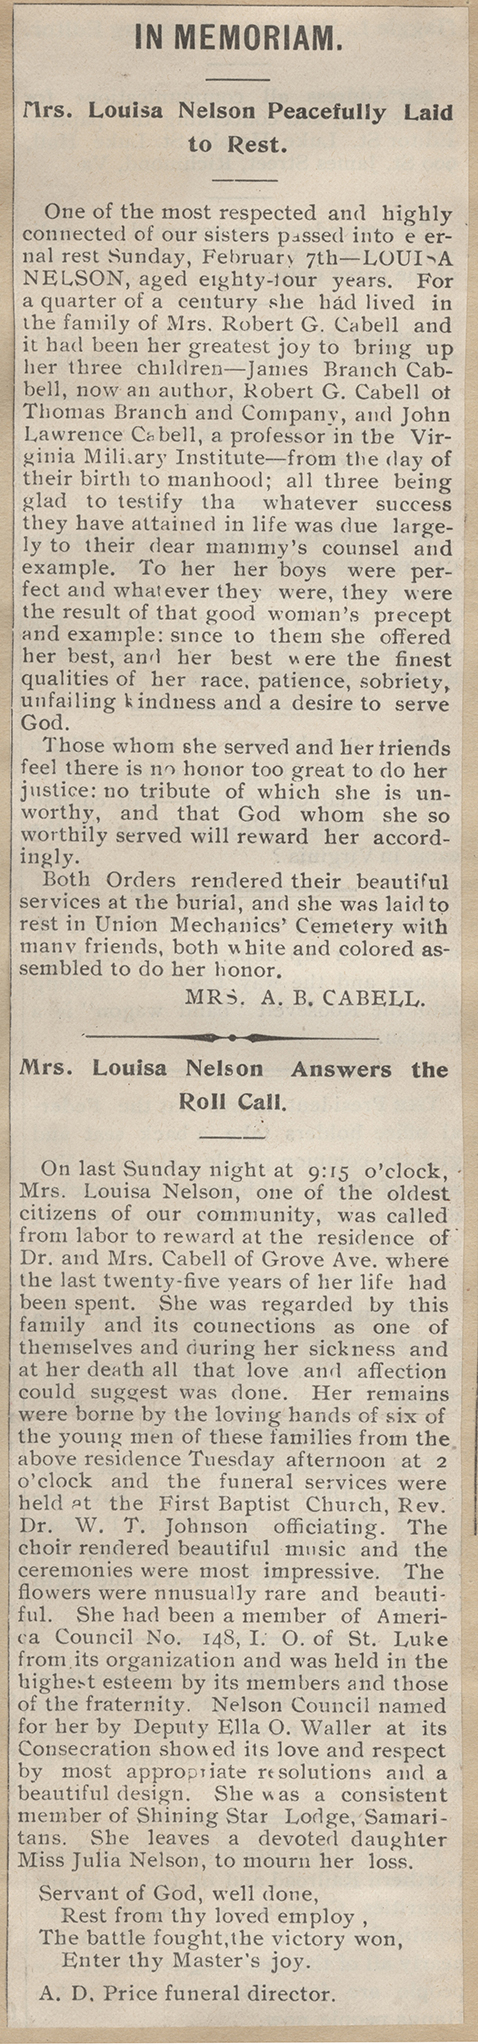 newspaper clipping Anne Cabell memorial for Louisa Nelson